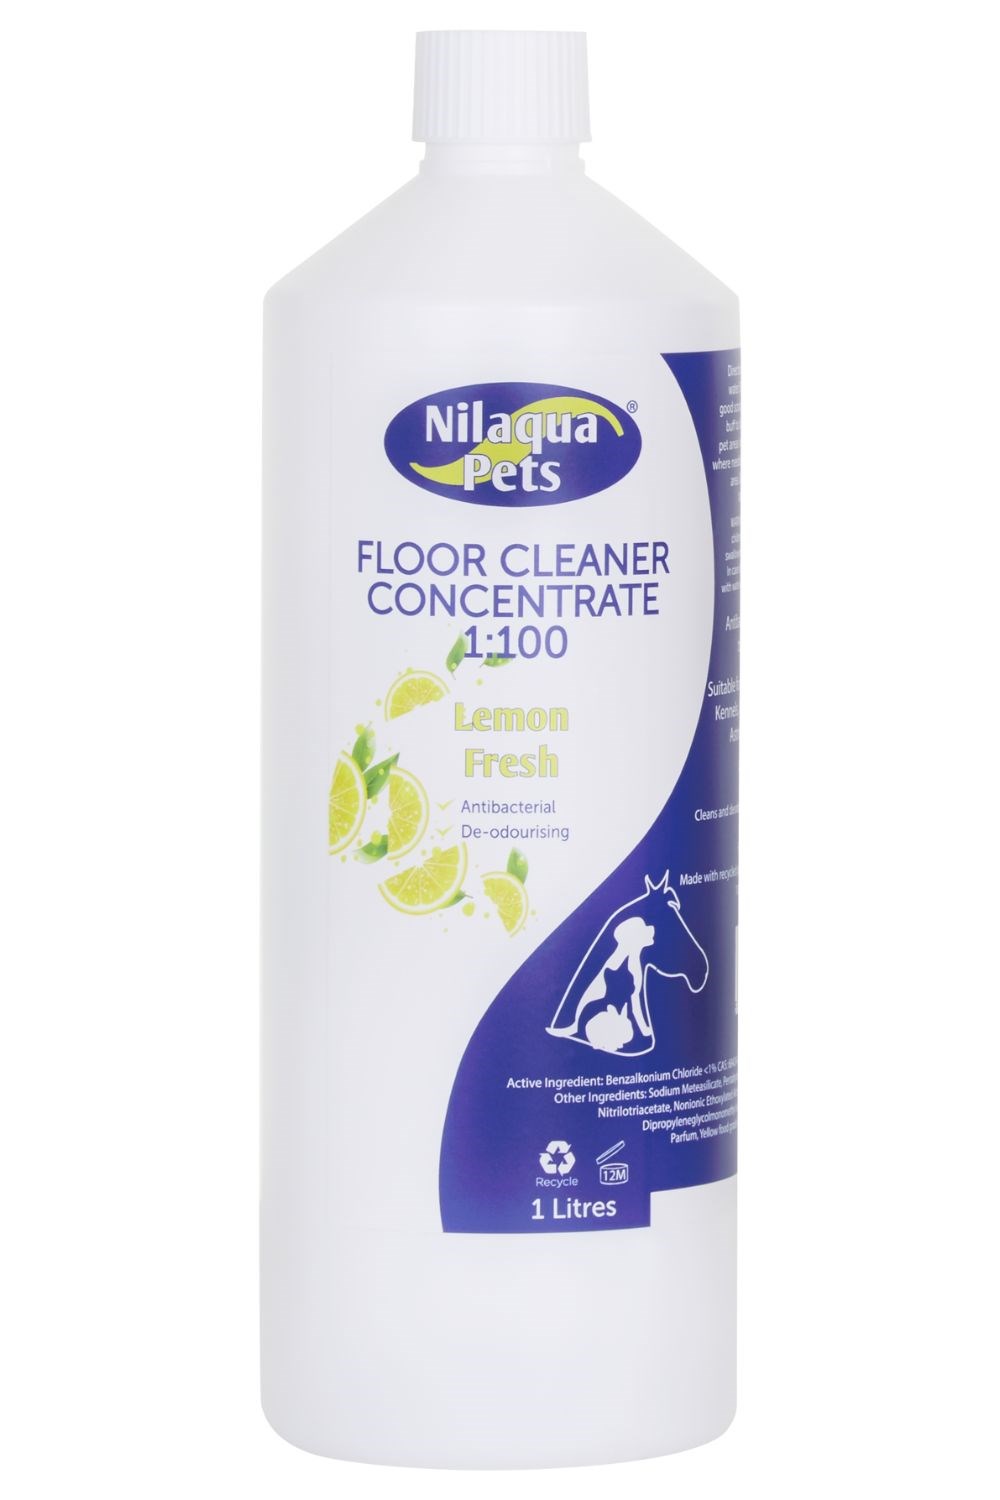 Pet Floor Cleaner Concentrate 1:100 1L -